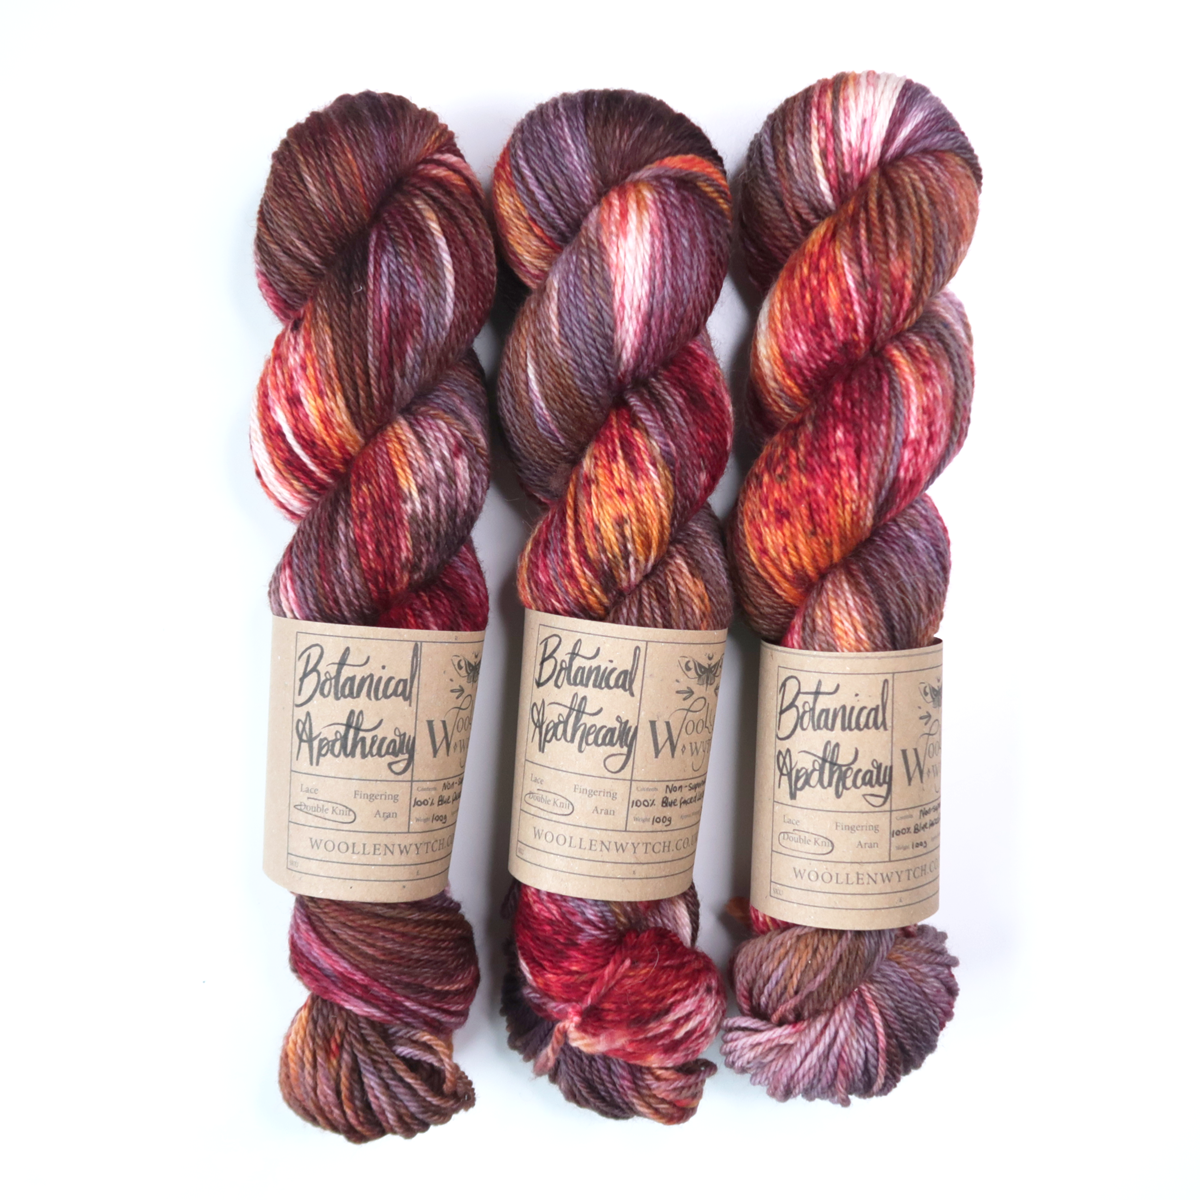 hand dyed yarn woollen wytch, botanical apothecary has red, purples and oranges blended through bfl yarn.